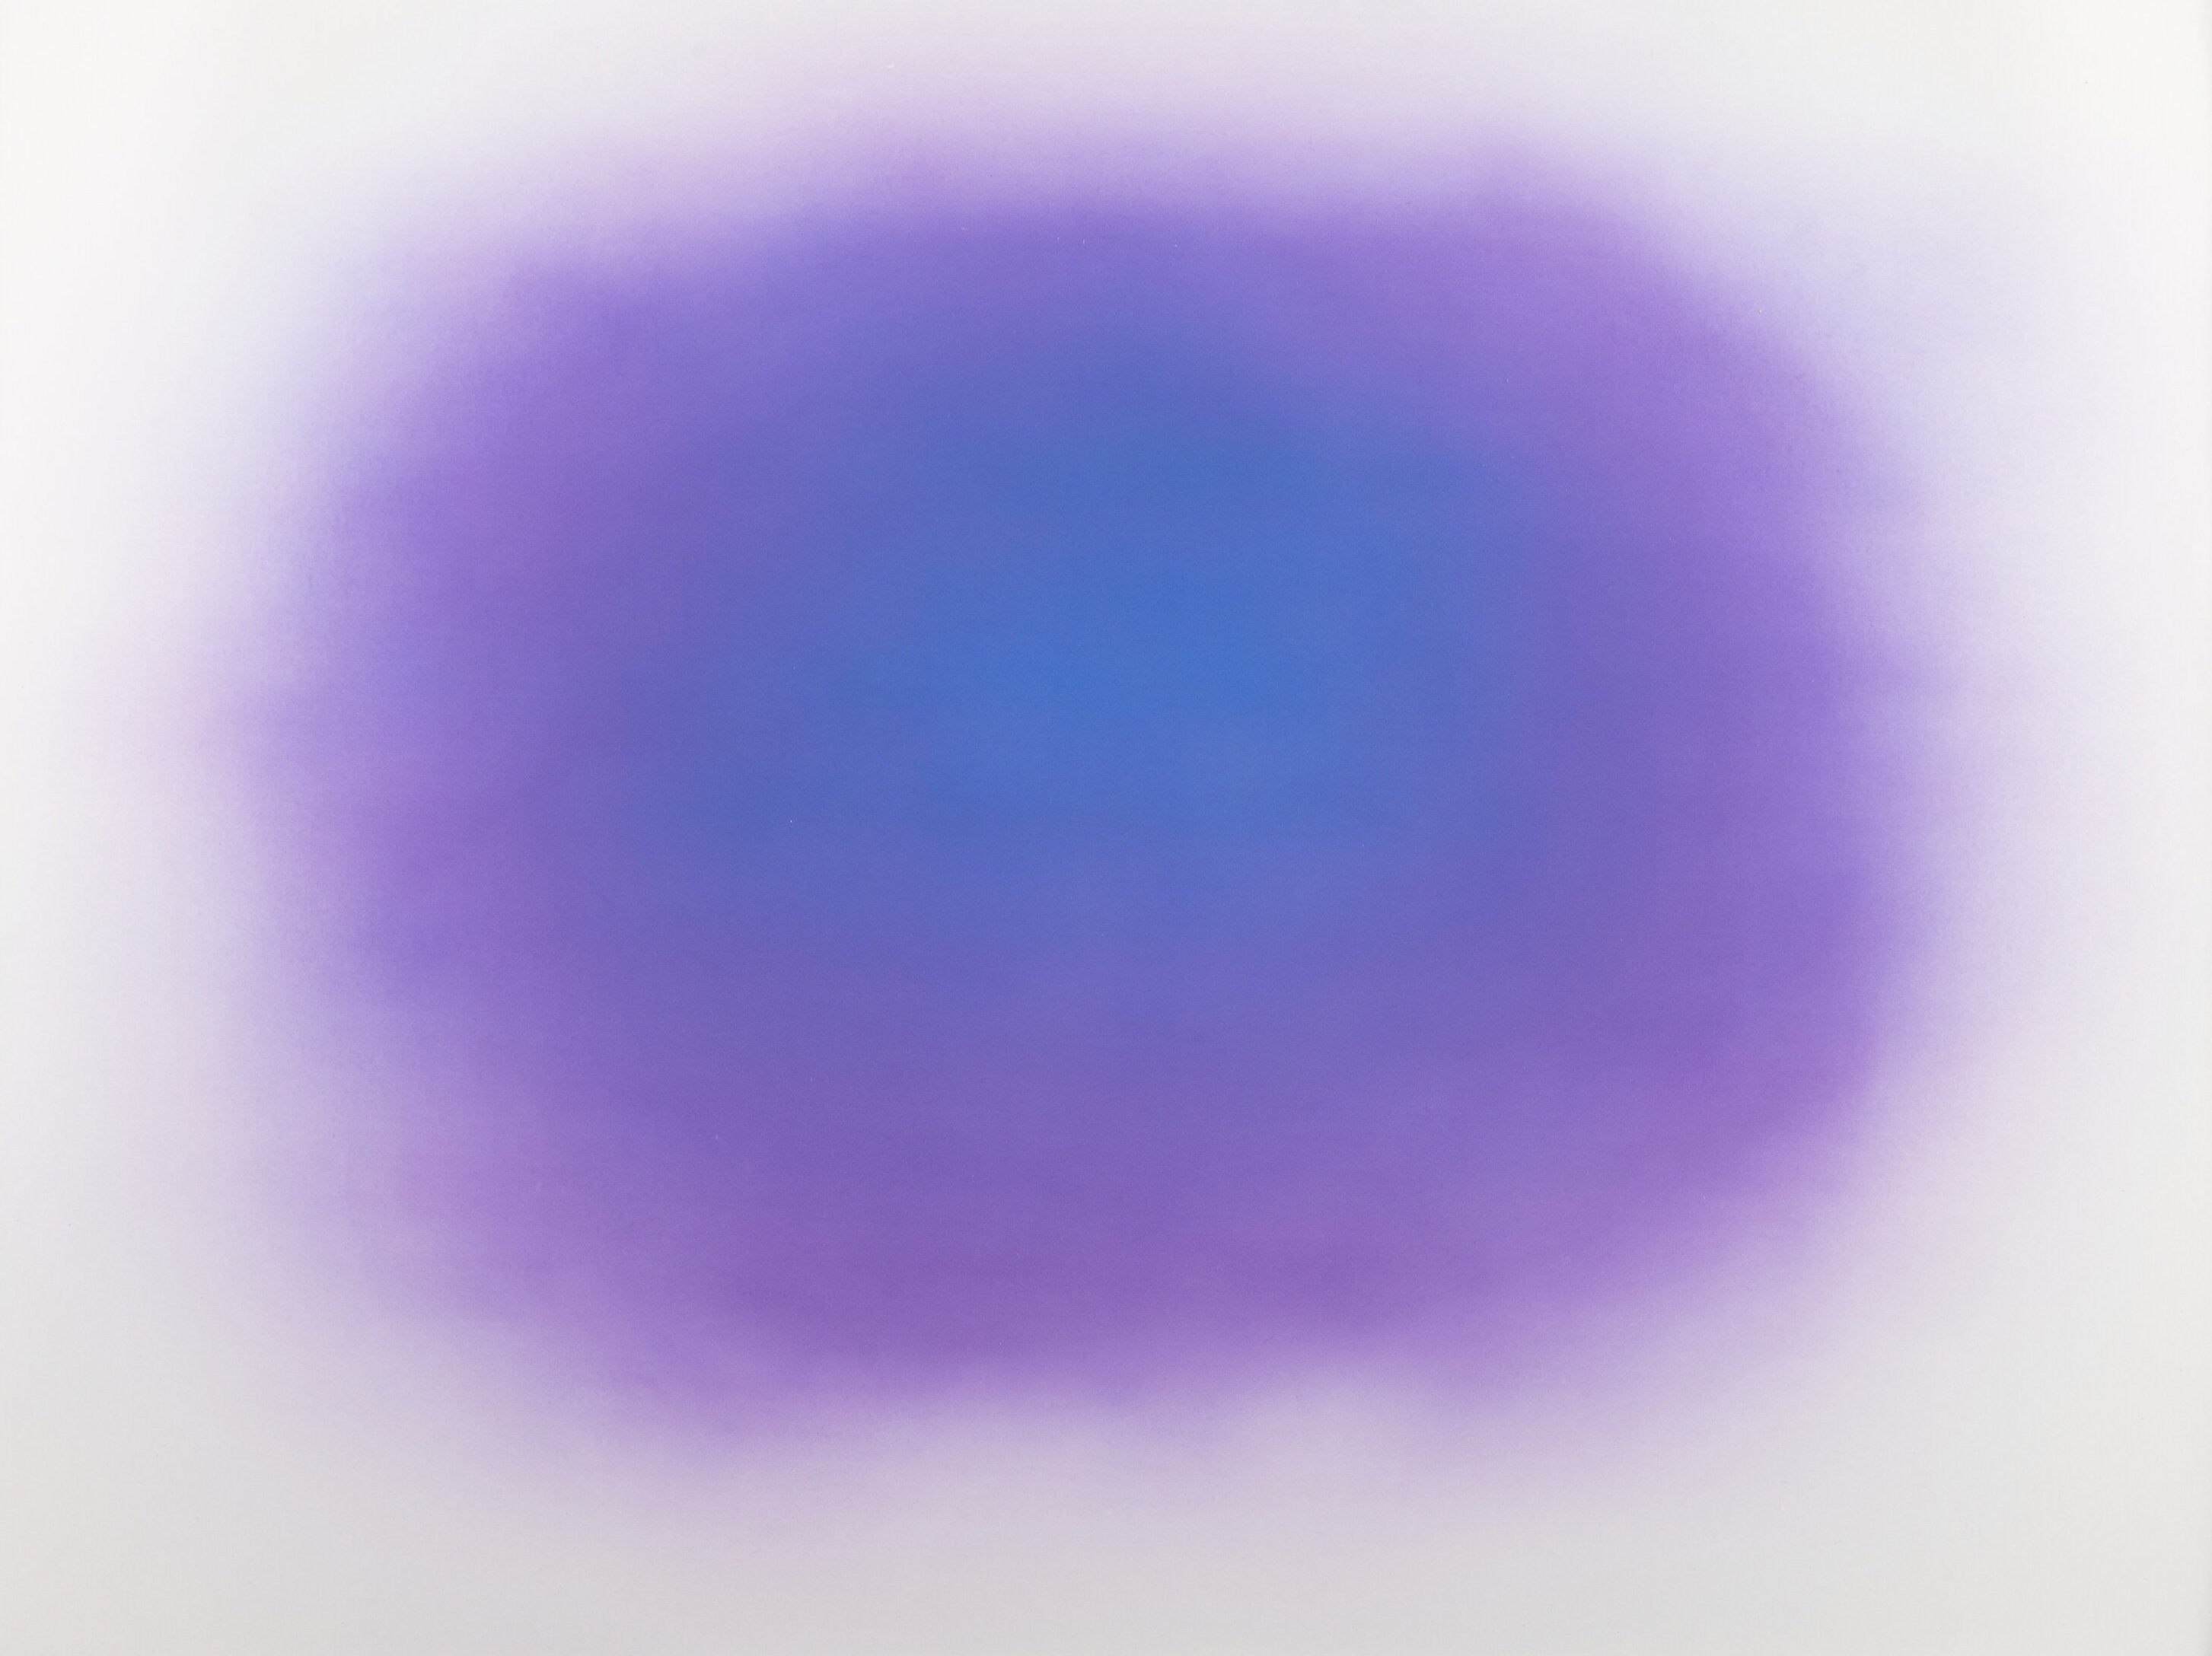 Untitled (Purple), from Flow, 2019